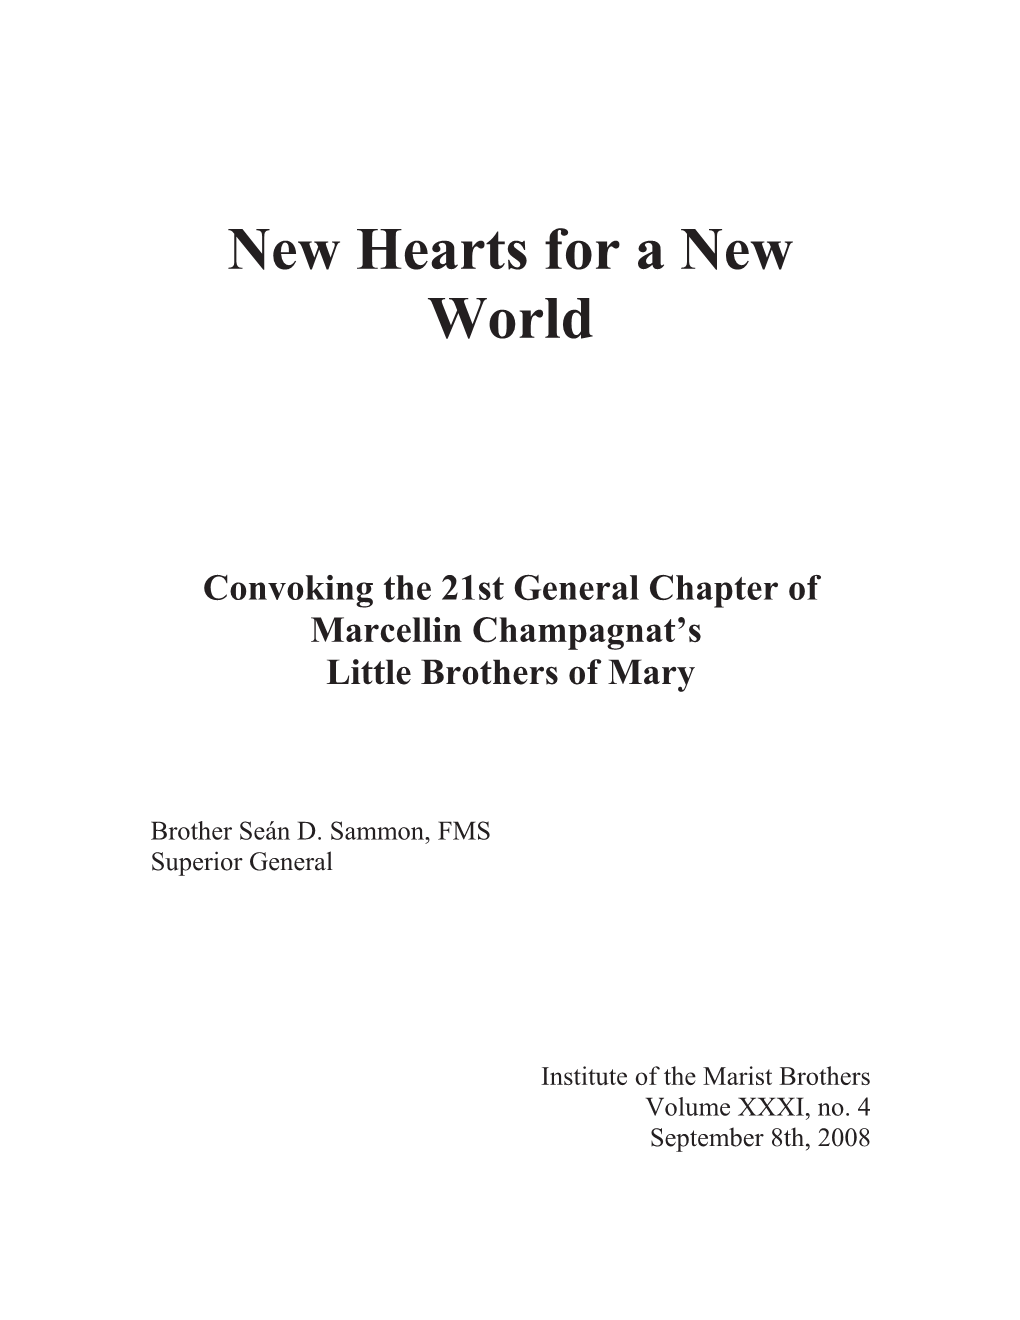 New Hearts for a New World